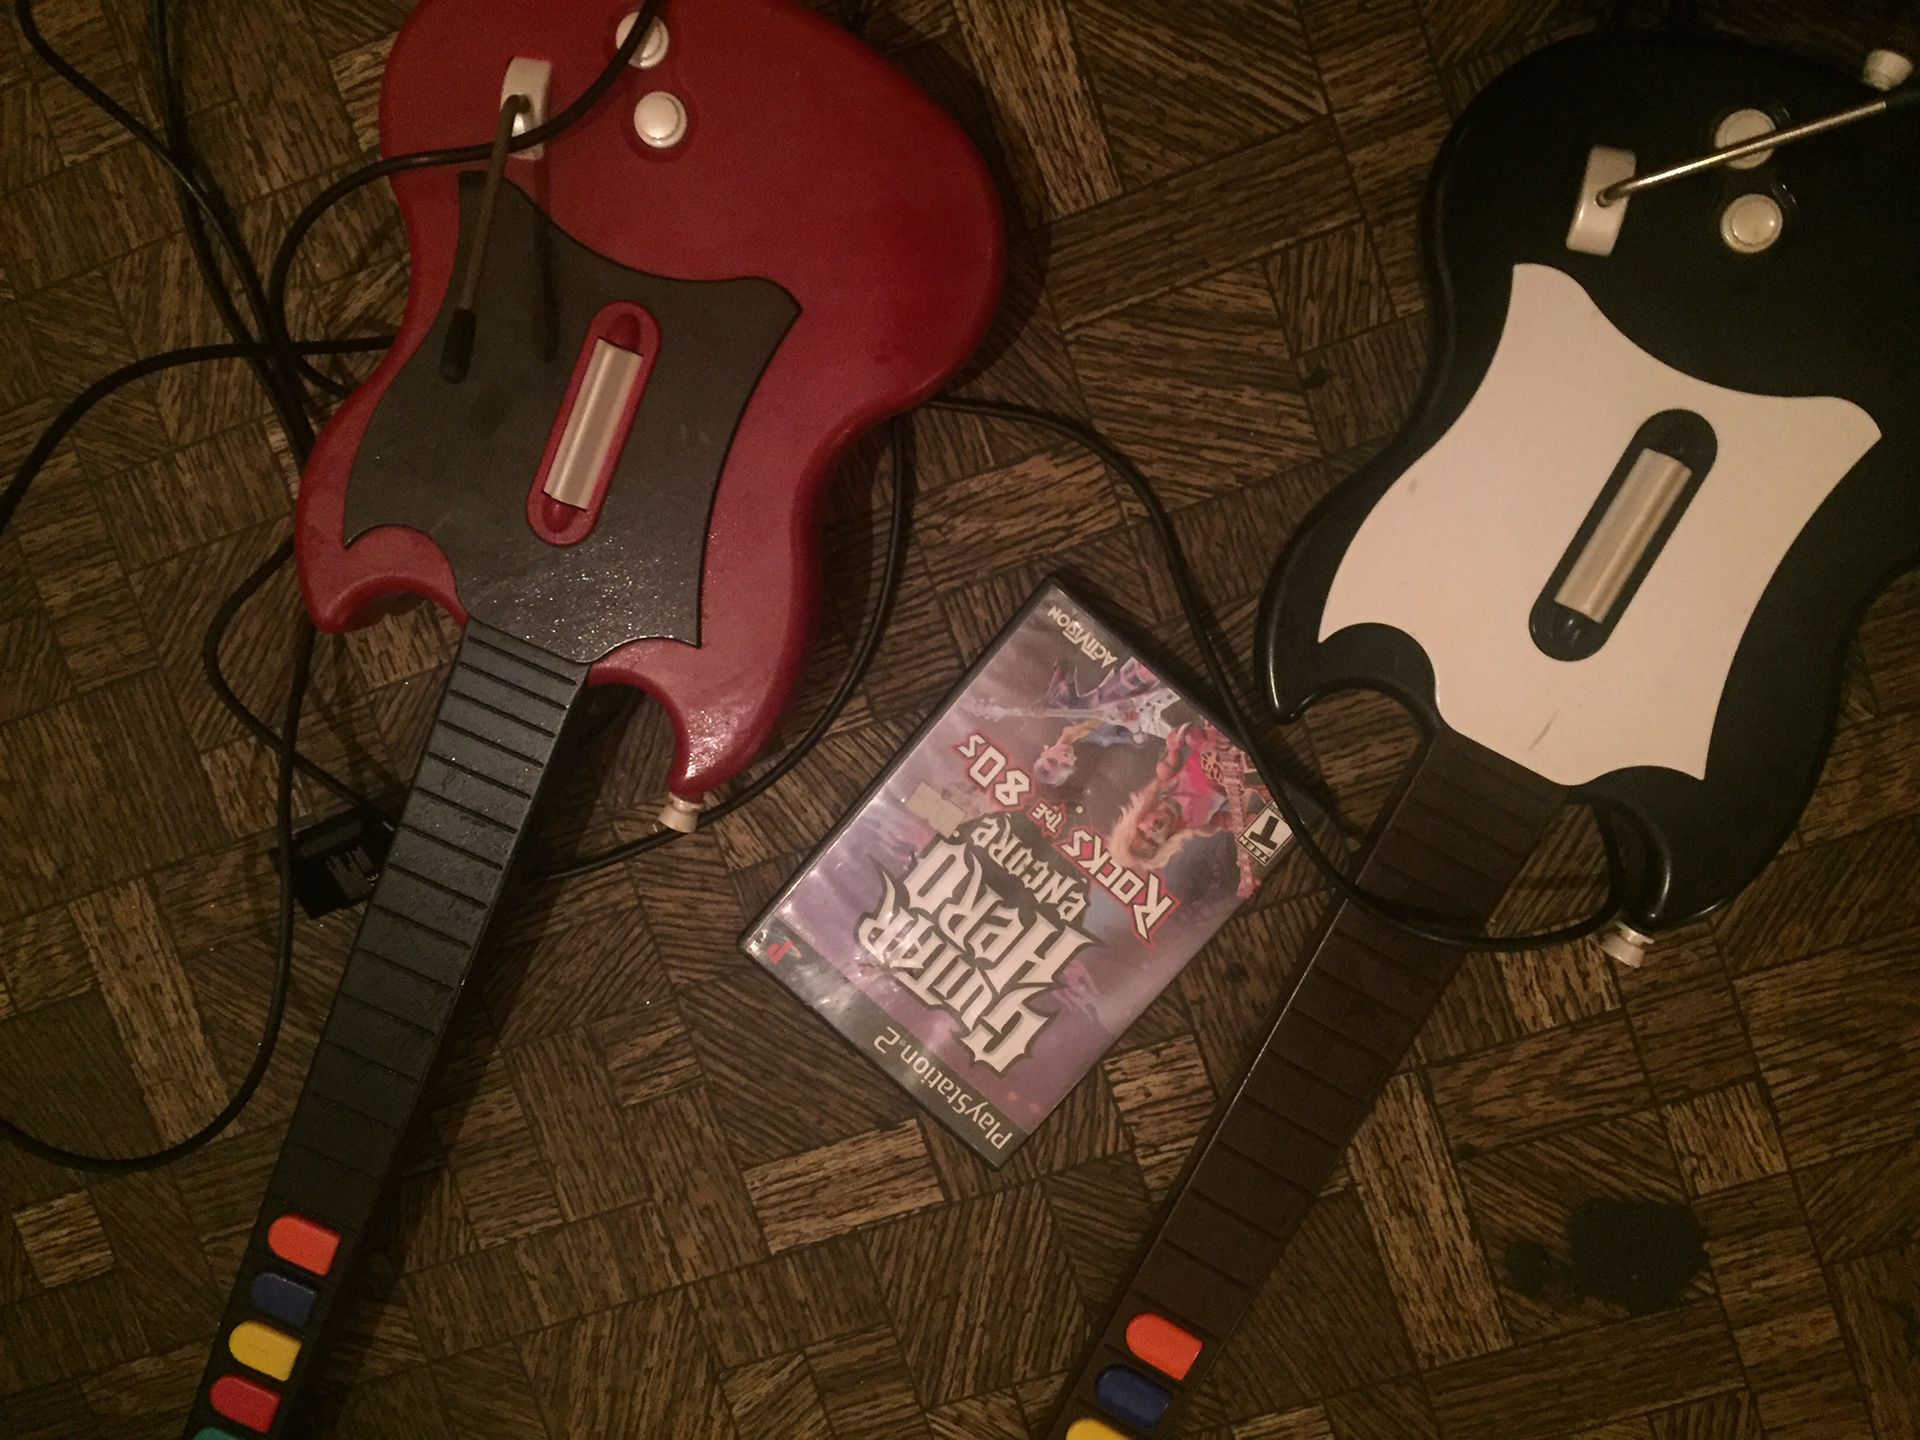 Ps2 guitar and game